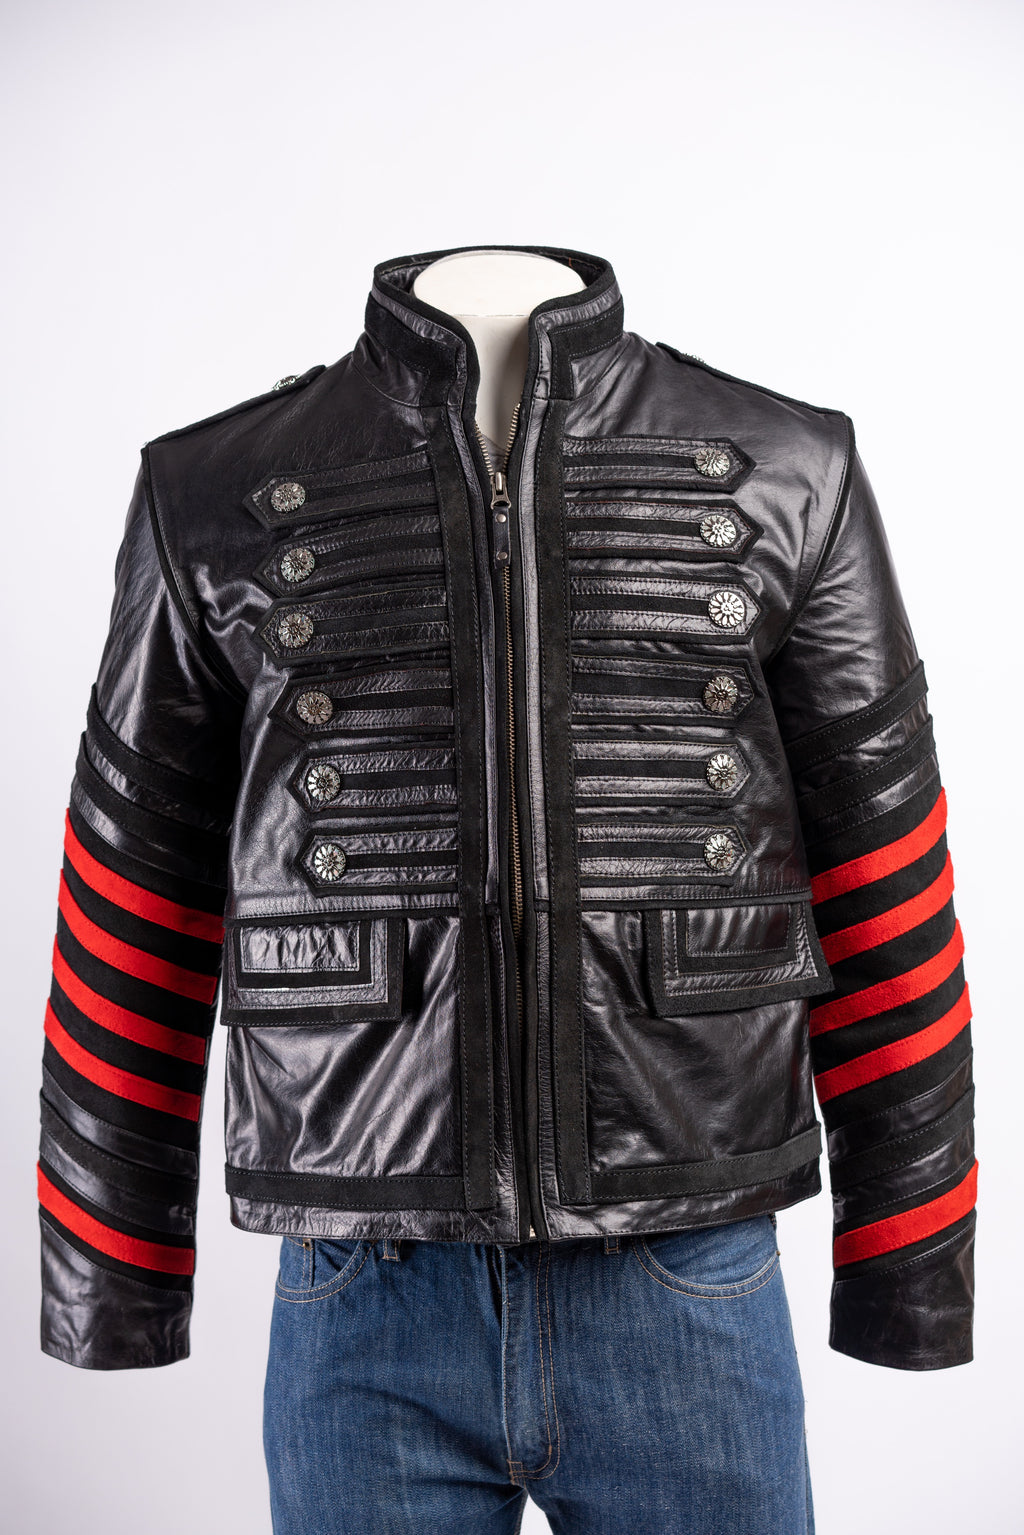 Men's Gothic Military Jacket With Suede Paneling: Gerard